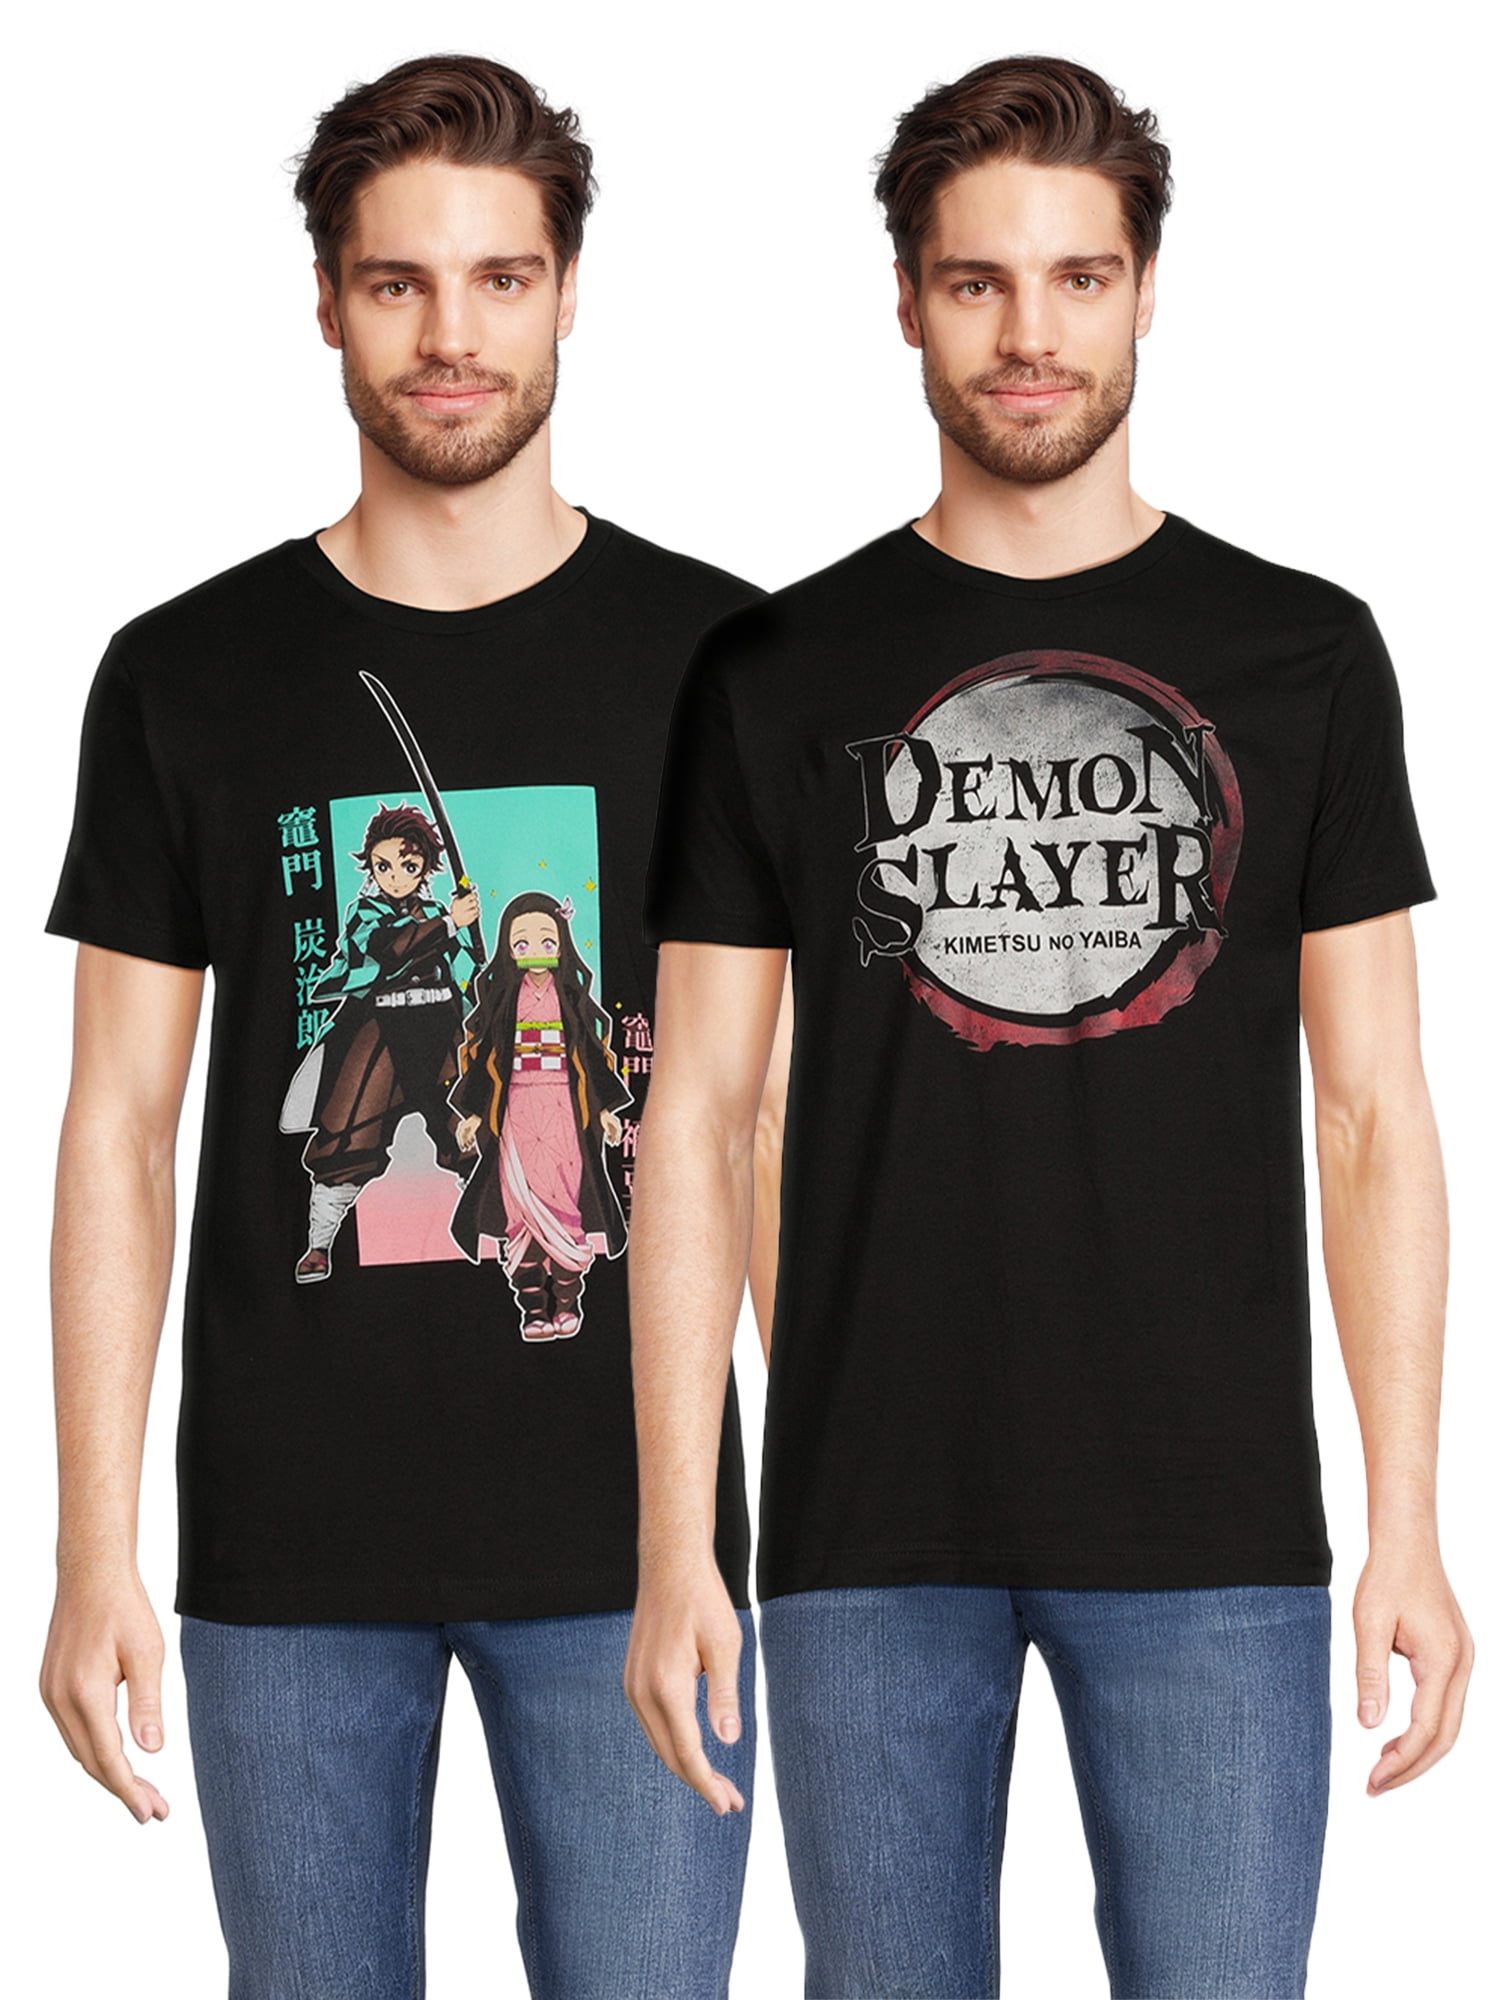 Demon Slayer Men’s and Big Men’s Graphic T-Shirts, 2-Pack, Sizes S-3XL ...